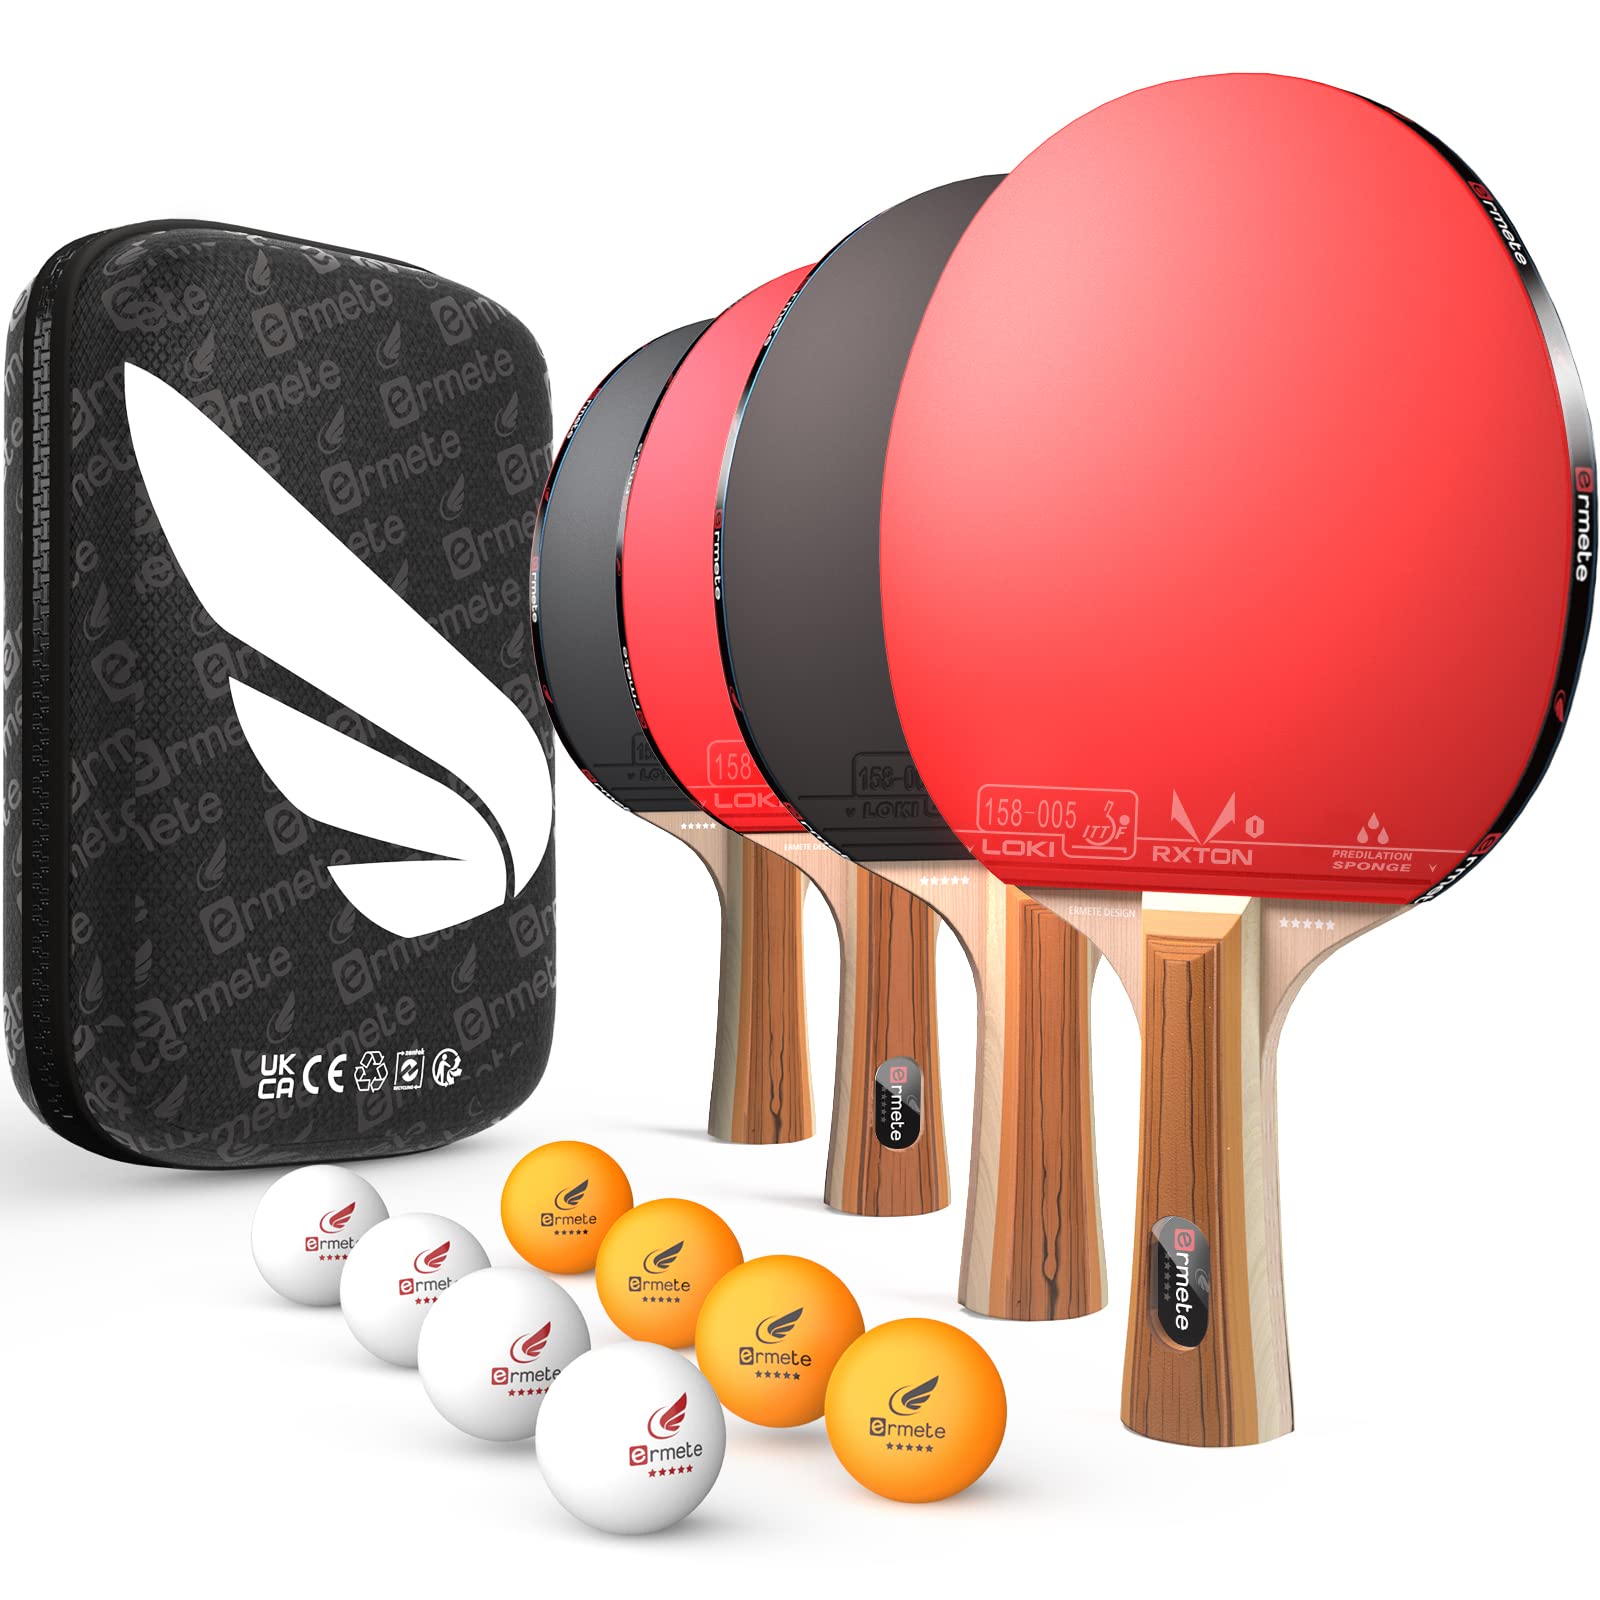 Killerspin Jet800 SPEED N2 Ping Pong Paddle with Storage Case Red/Black  825509110117